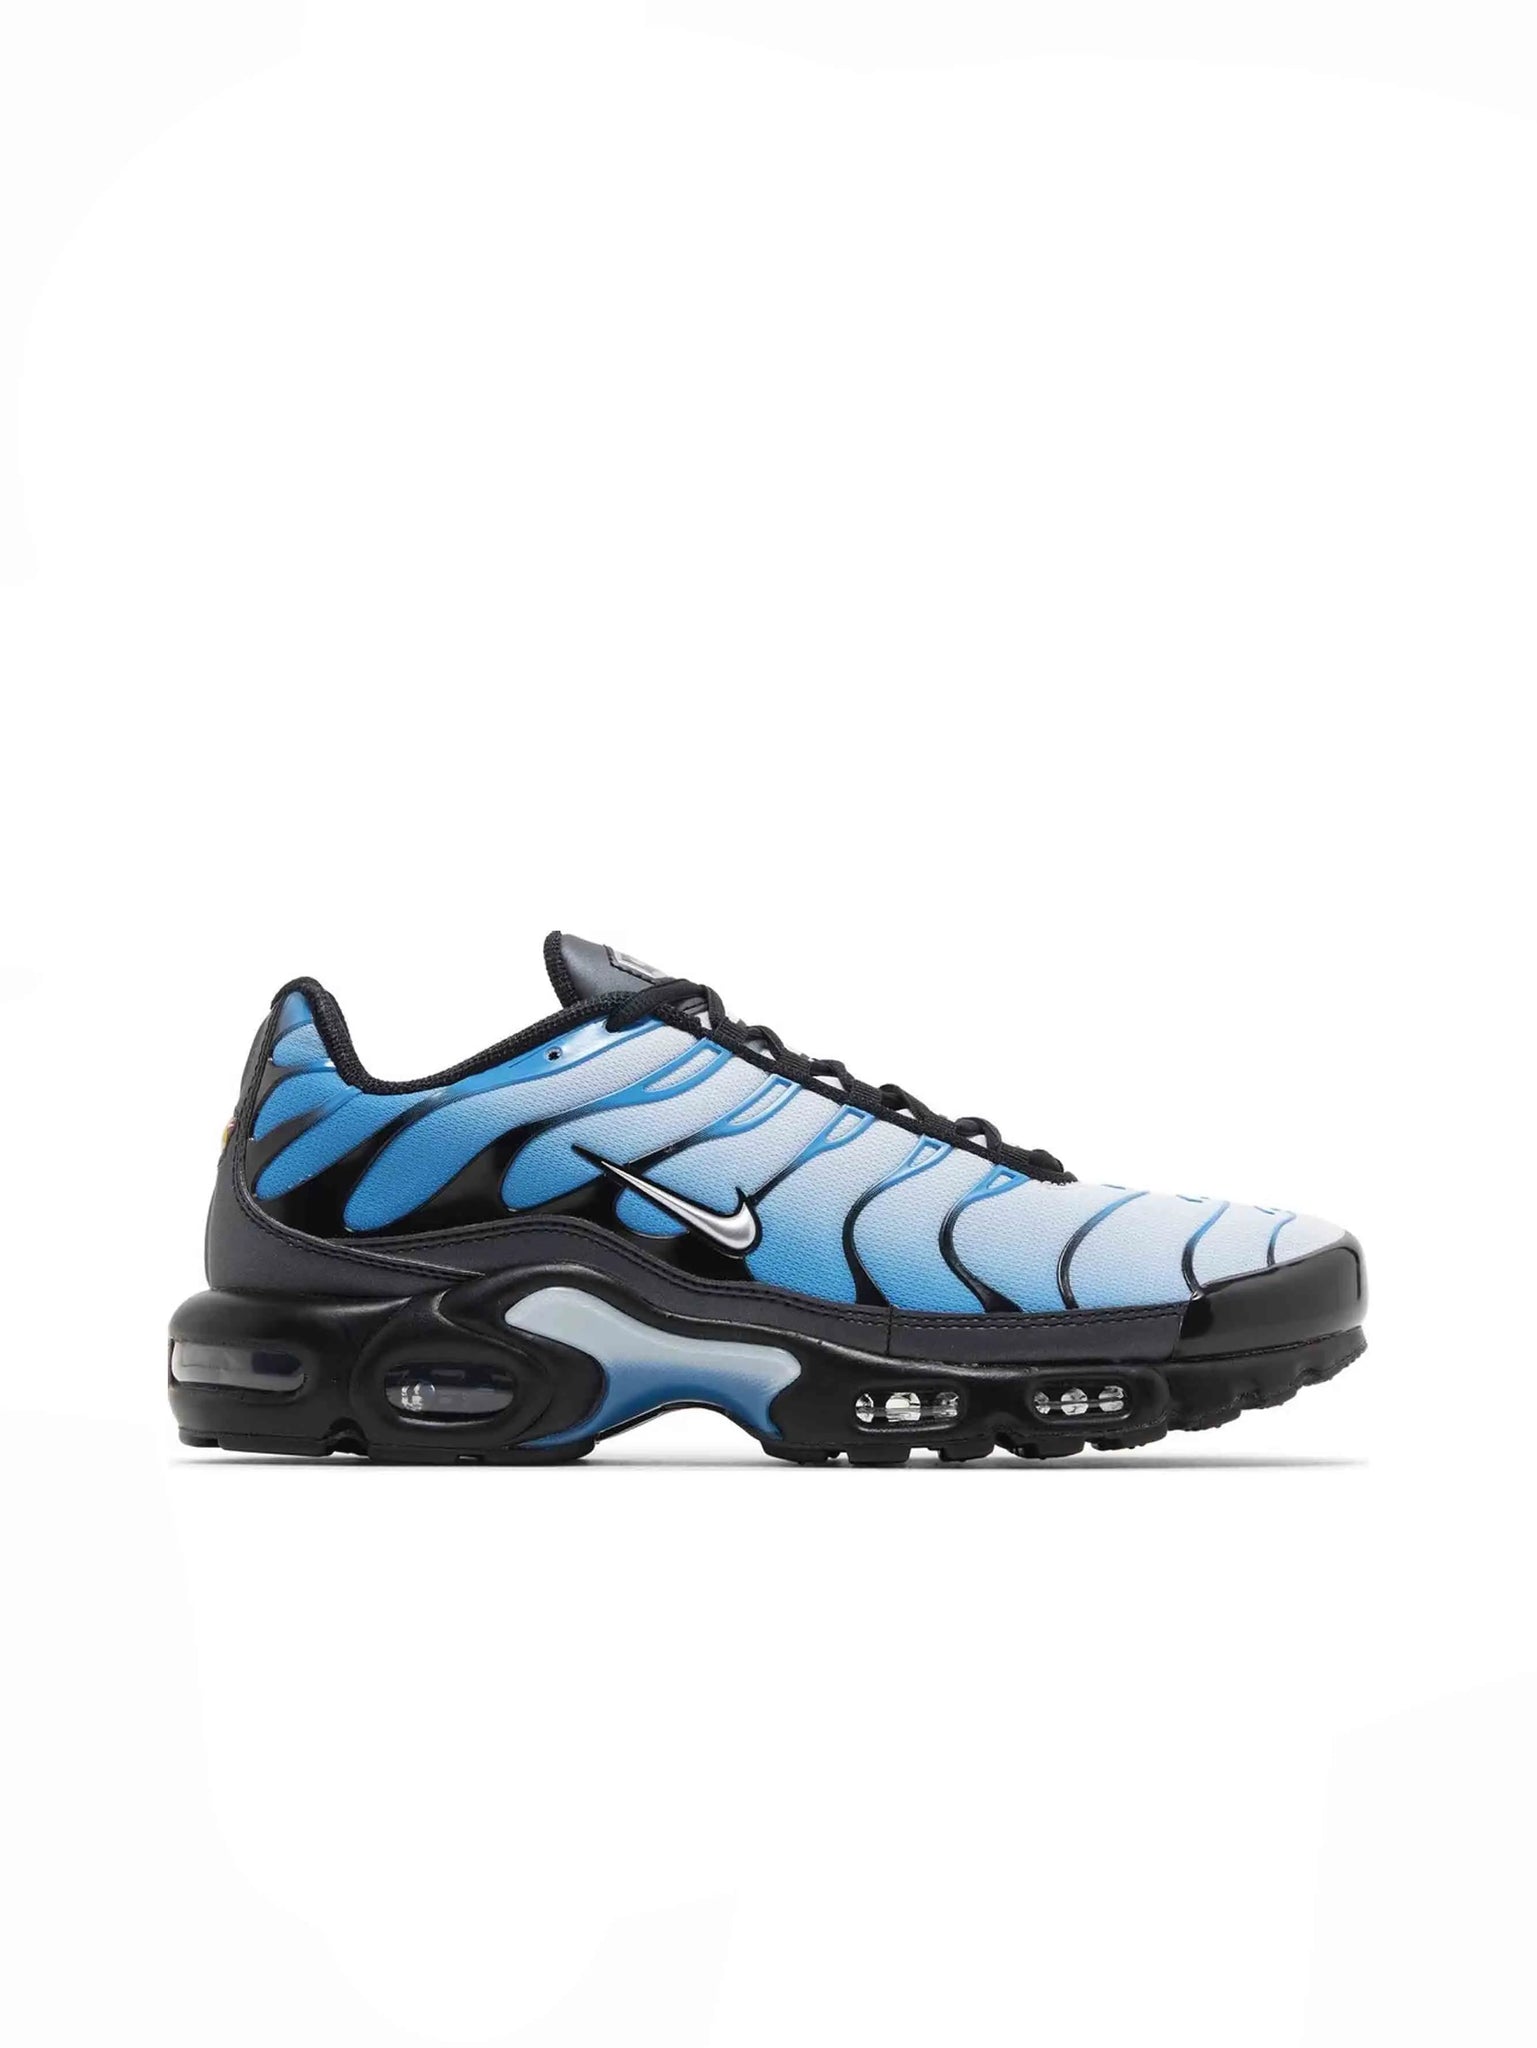 Nike Air Max Plus Blue Gradient in Auckland, New Zealand - Shop name